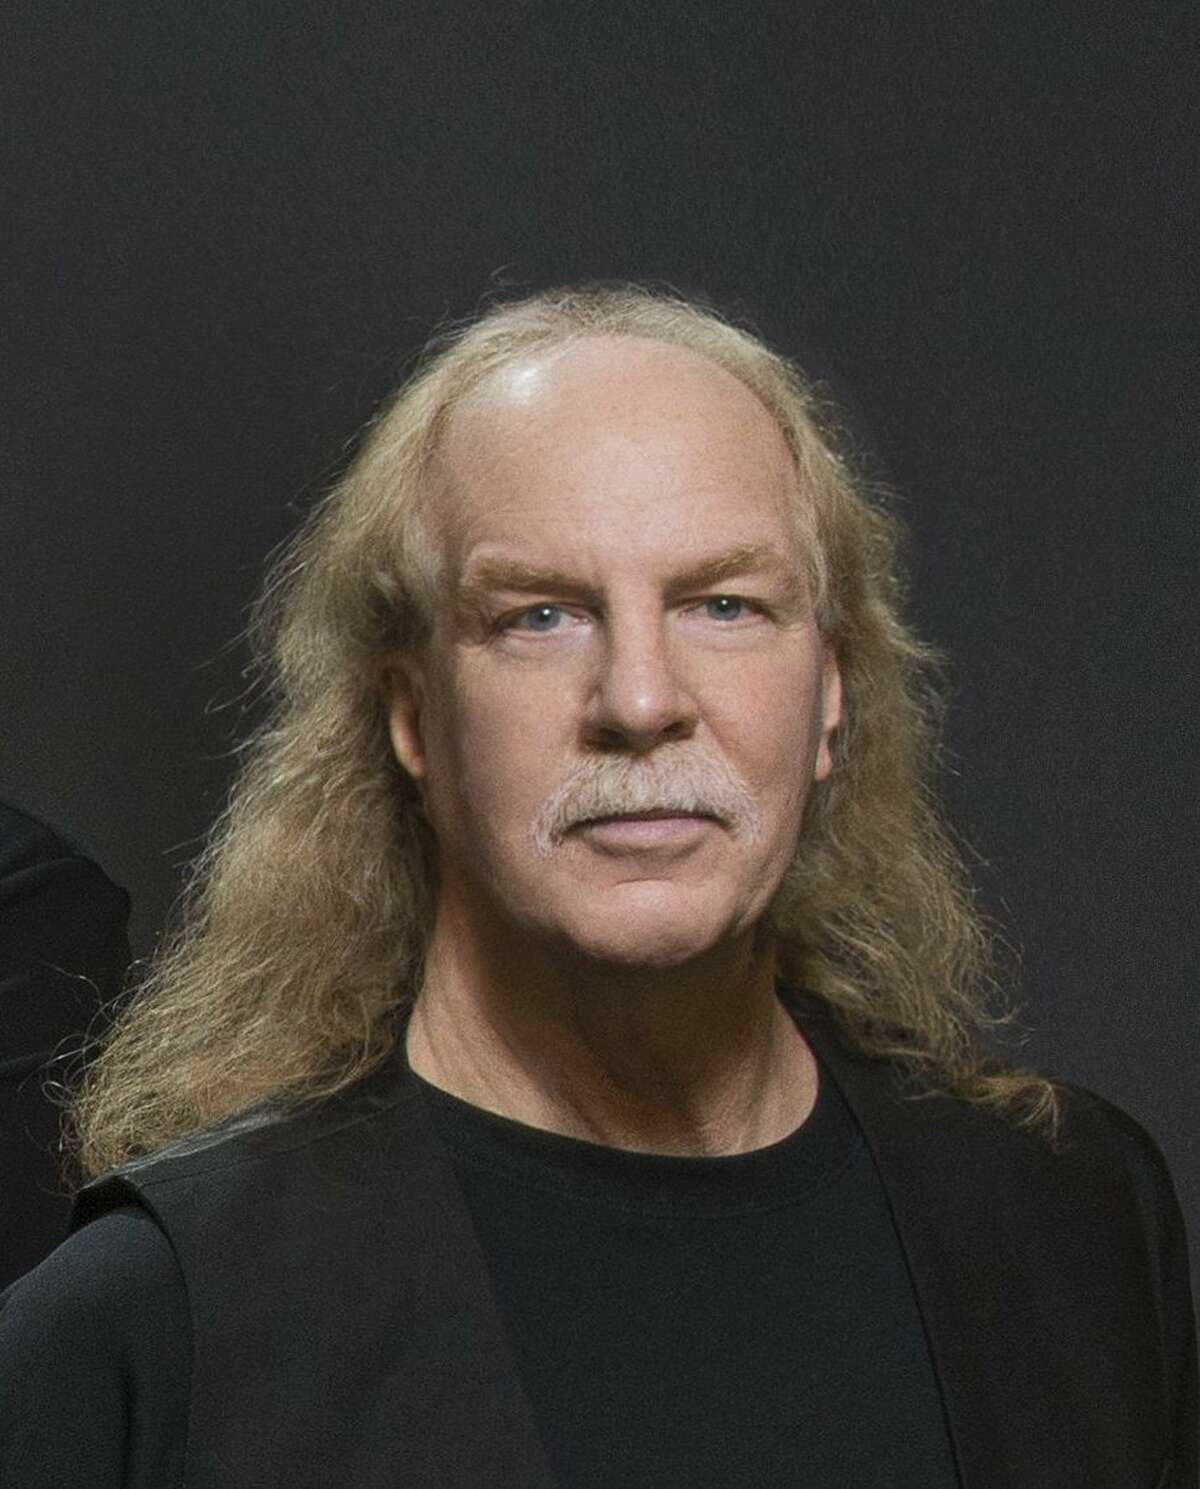 This June 2014 photo provided by Three Dog Night shows keyboard player, Jimmy Greenspoon, an original member of the rock band, Three Dog Night. Greenspoon's agent, Chris Burke, said he died Wednesday, March 11, 2015, of cancer at his home in North Potomac, Md. He was 67. (AP Photo/Three Dog Night, Steve Spatafore)